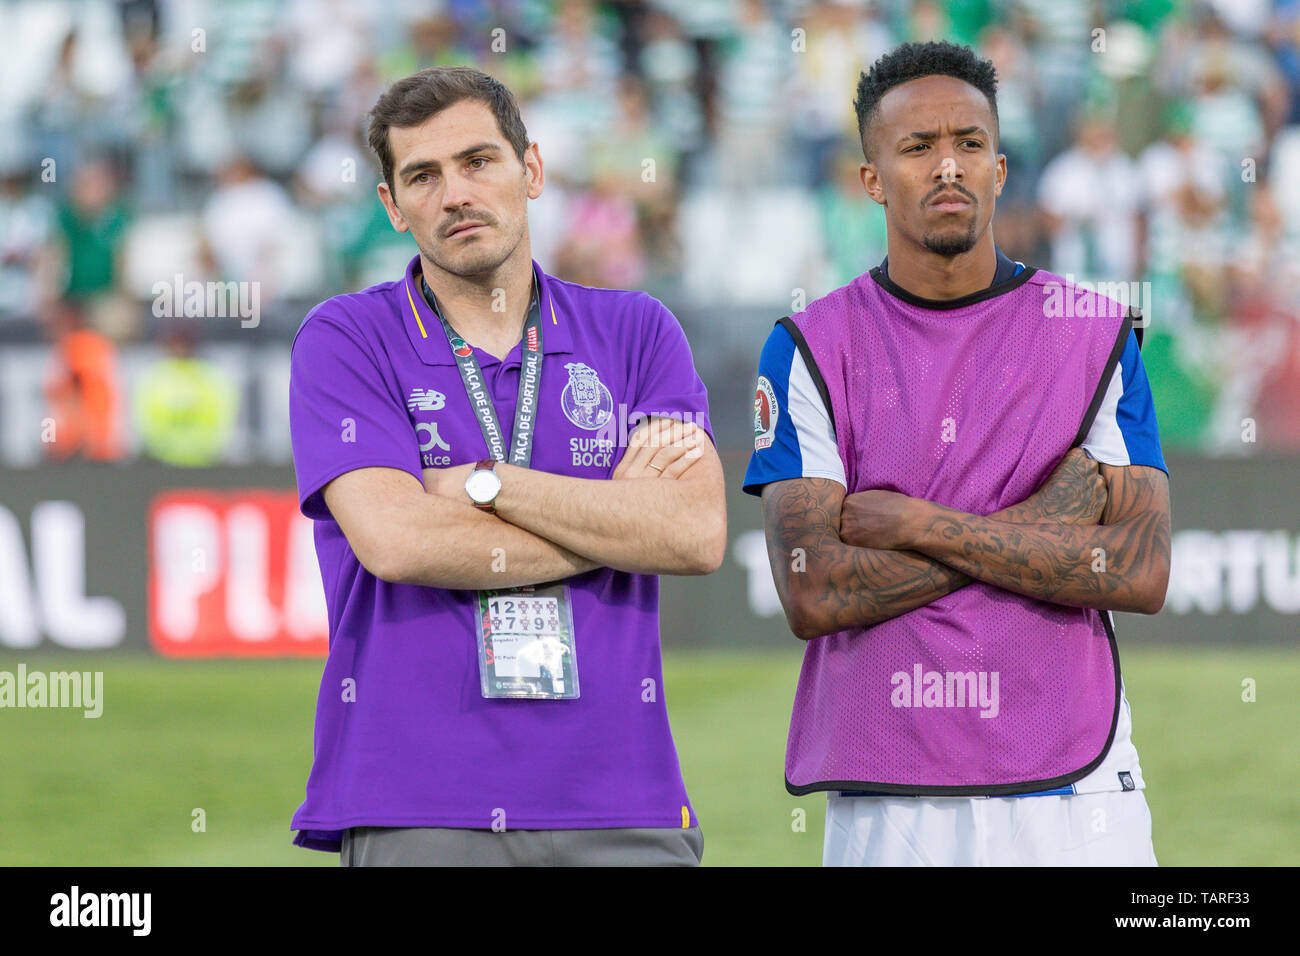 May 25, 2019. Oeiras, Portugal. Porto's goalkeeper from Spain Iker Casillas (1) and Porto's defender from Brazil Eder Militao (3) in the end of the game Sporting CP vs FC Porto © Alexandre de Sousa/Alamy Live News Stock Photo